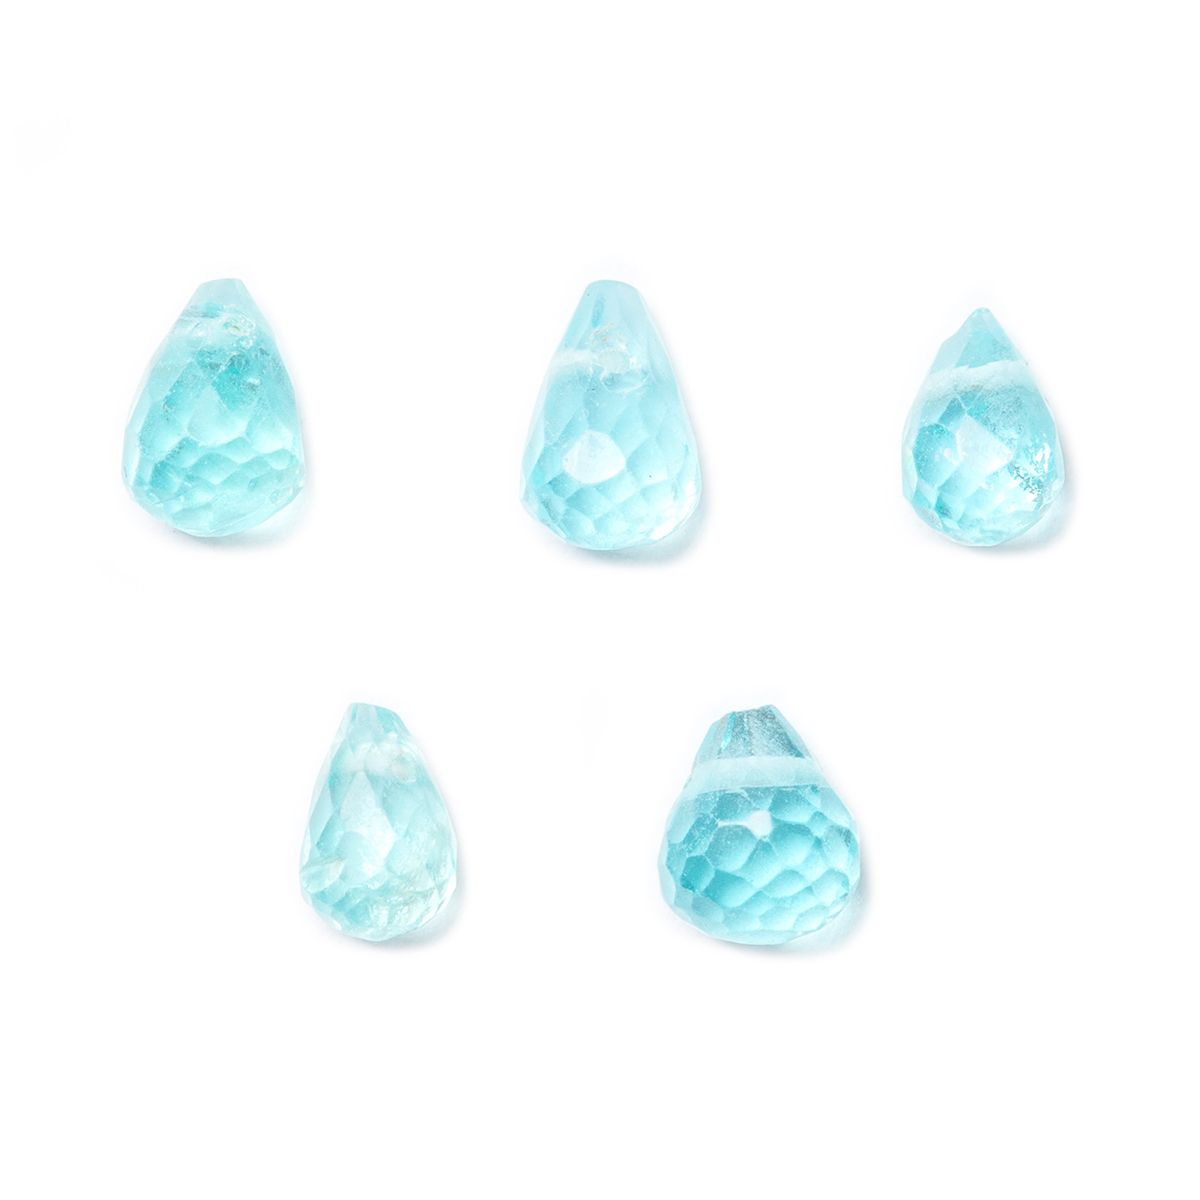 Apatite Faceted Drop Briolette Beads - Approx 3x2.5mm, Pack of 10 beads